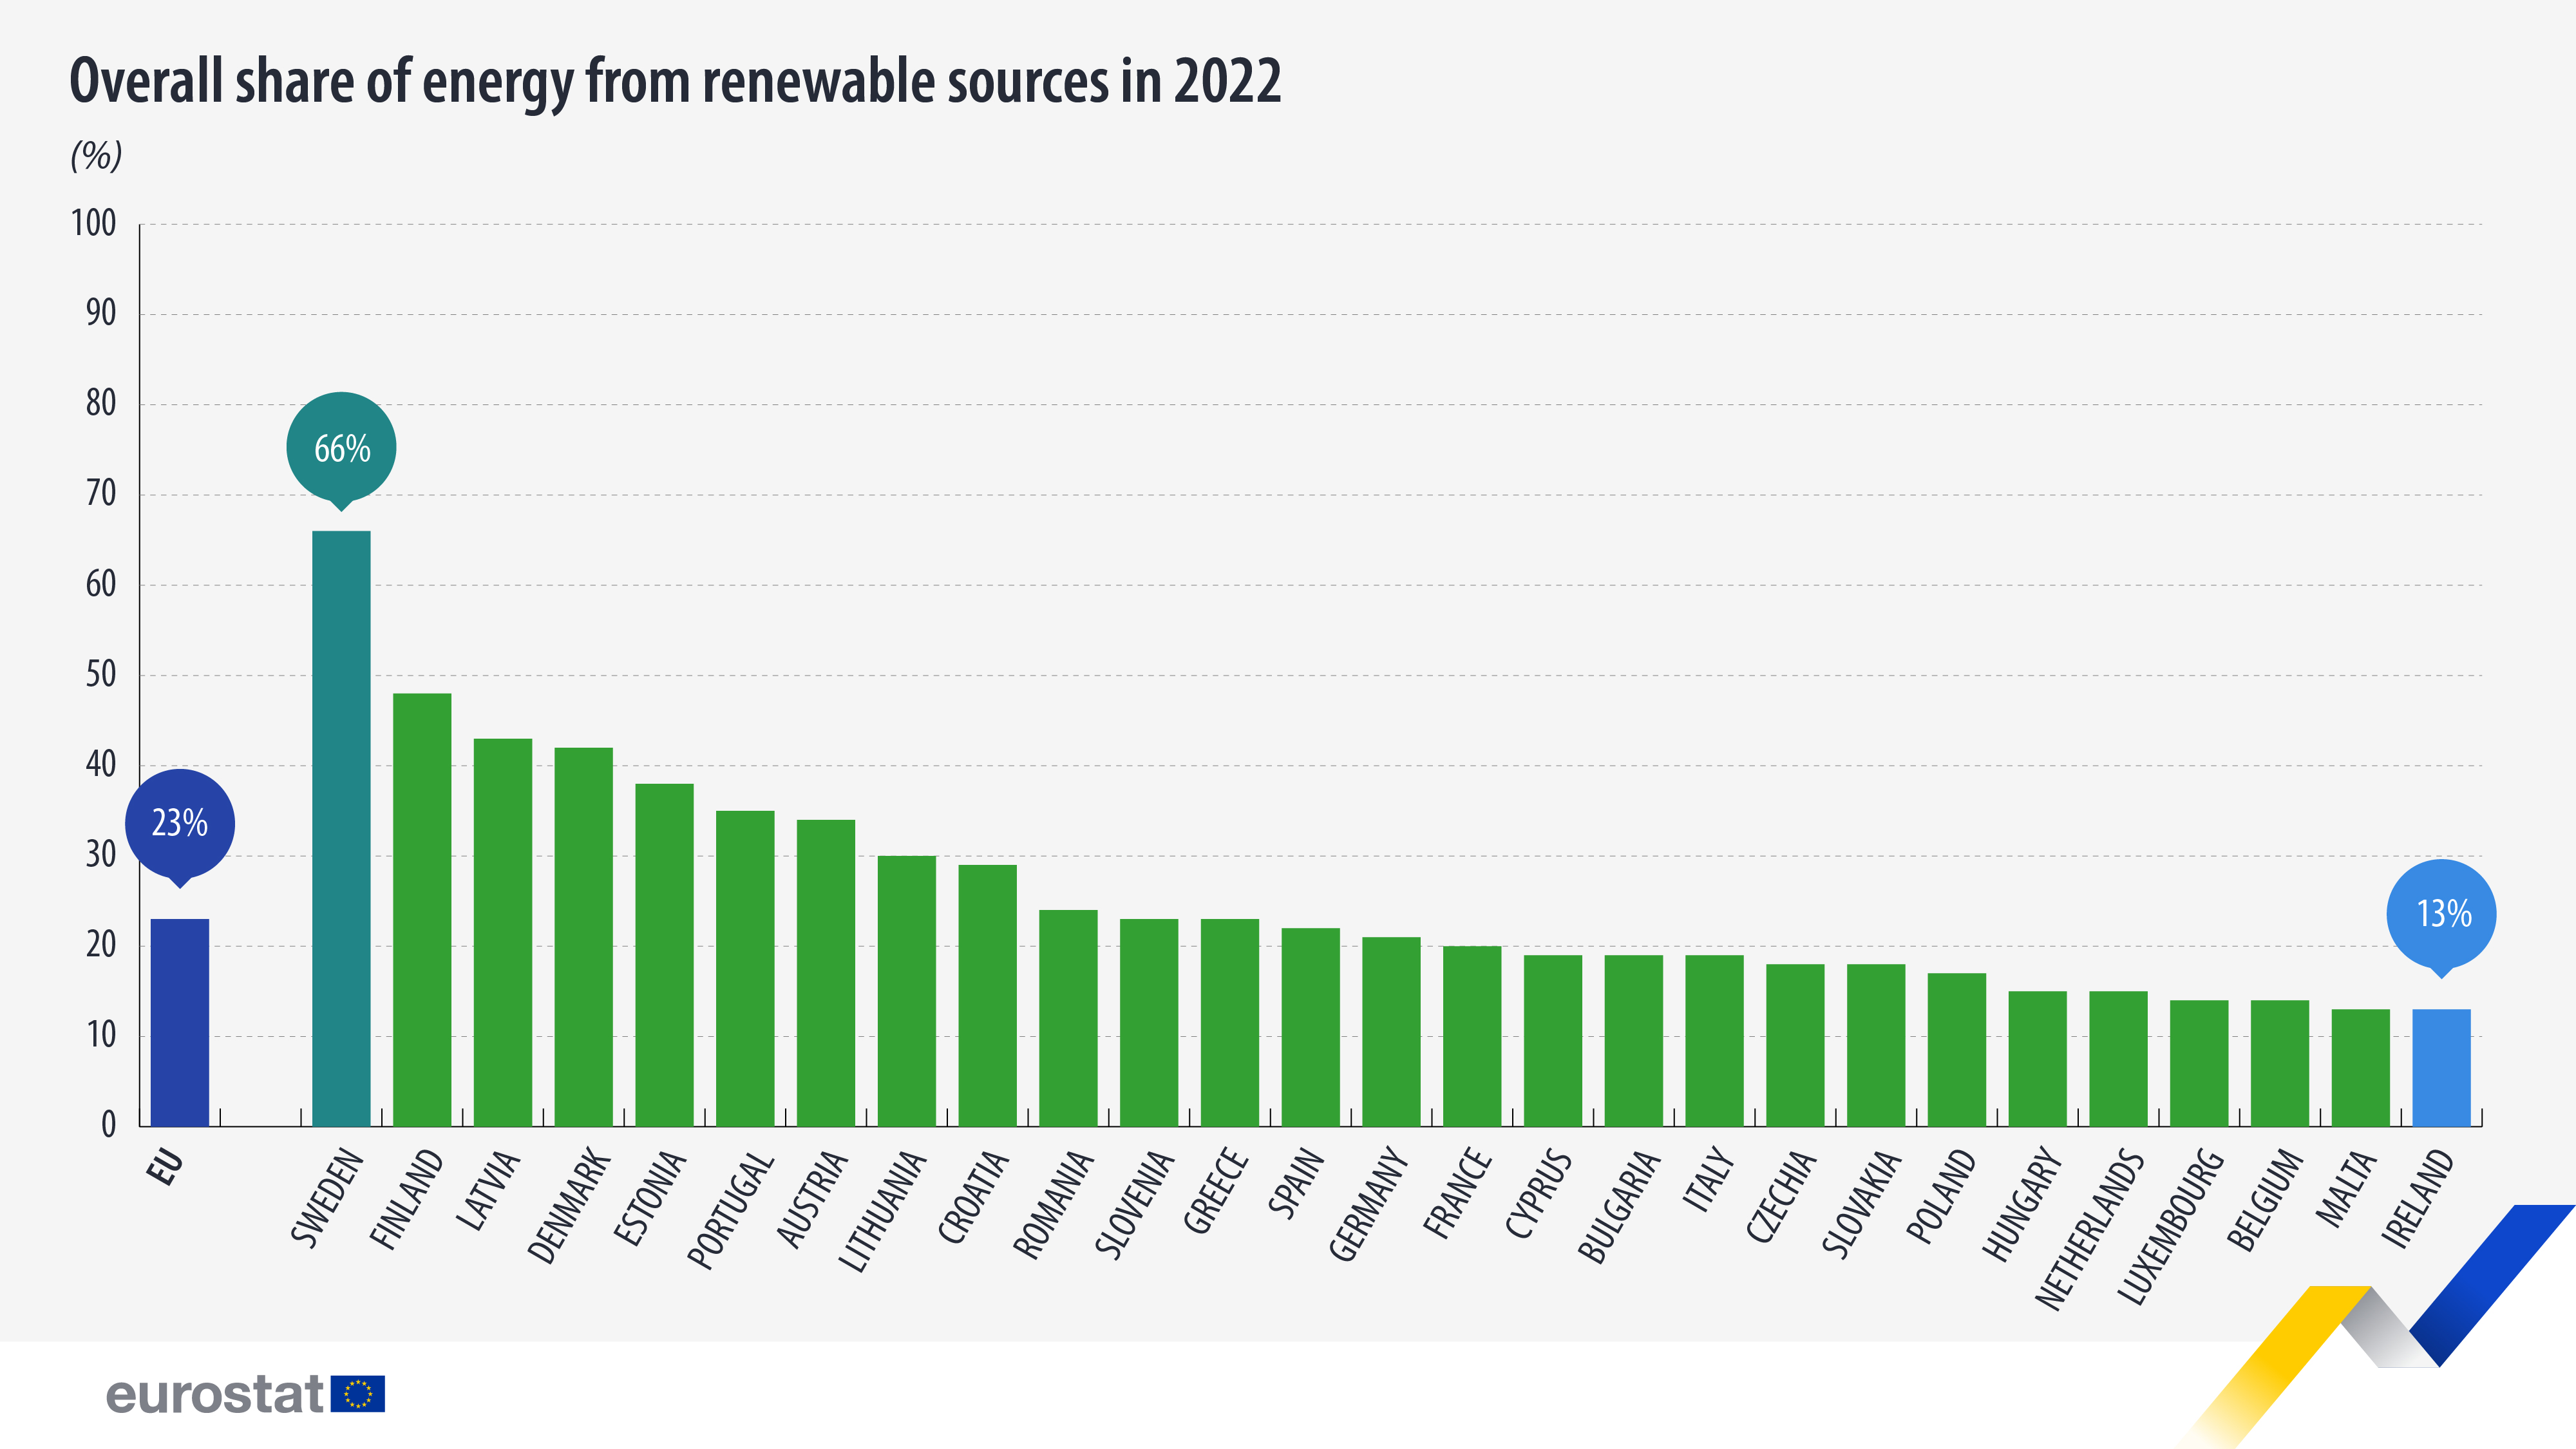 Overall share of energy from renewable sources in 2022, %